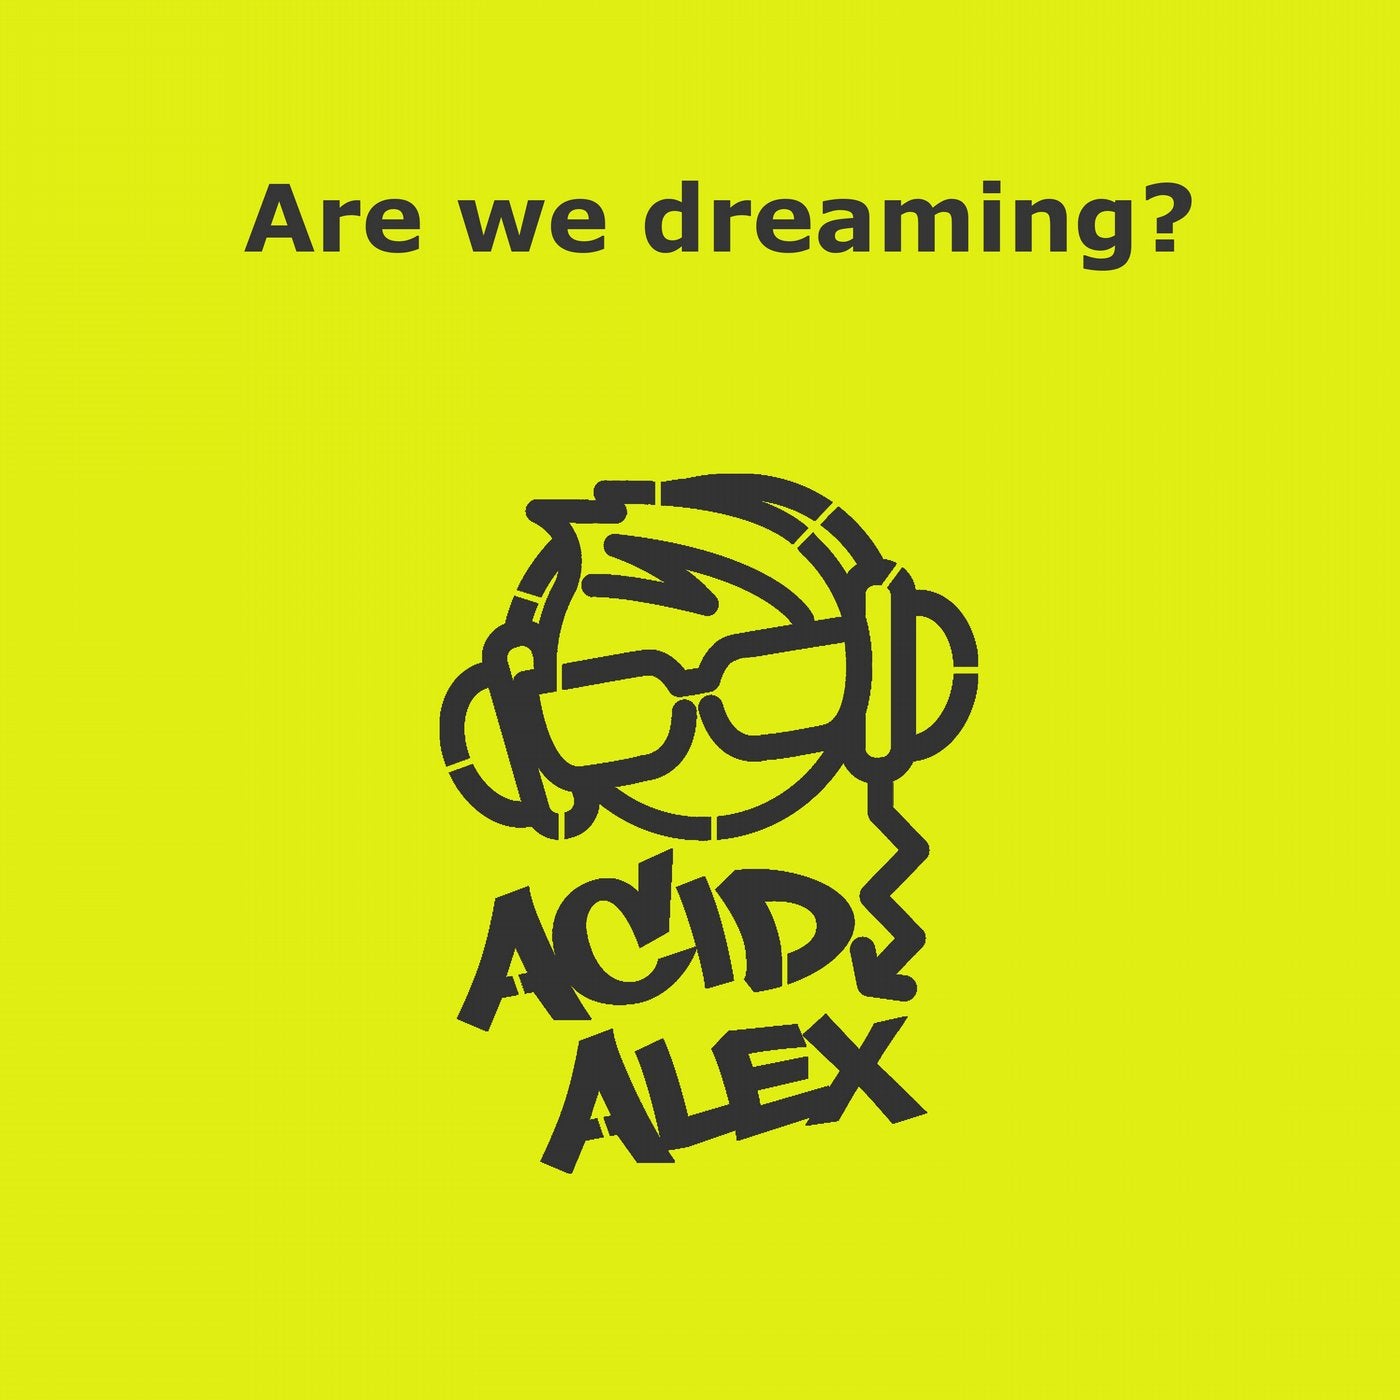 Are we dreaming?